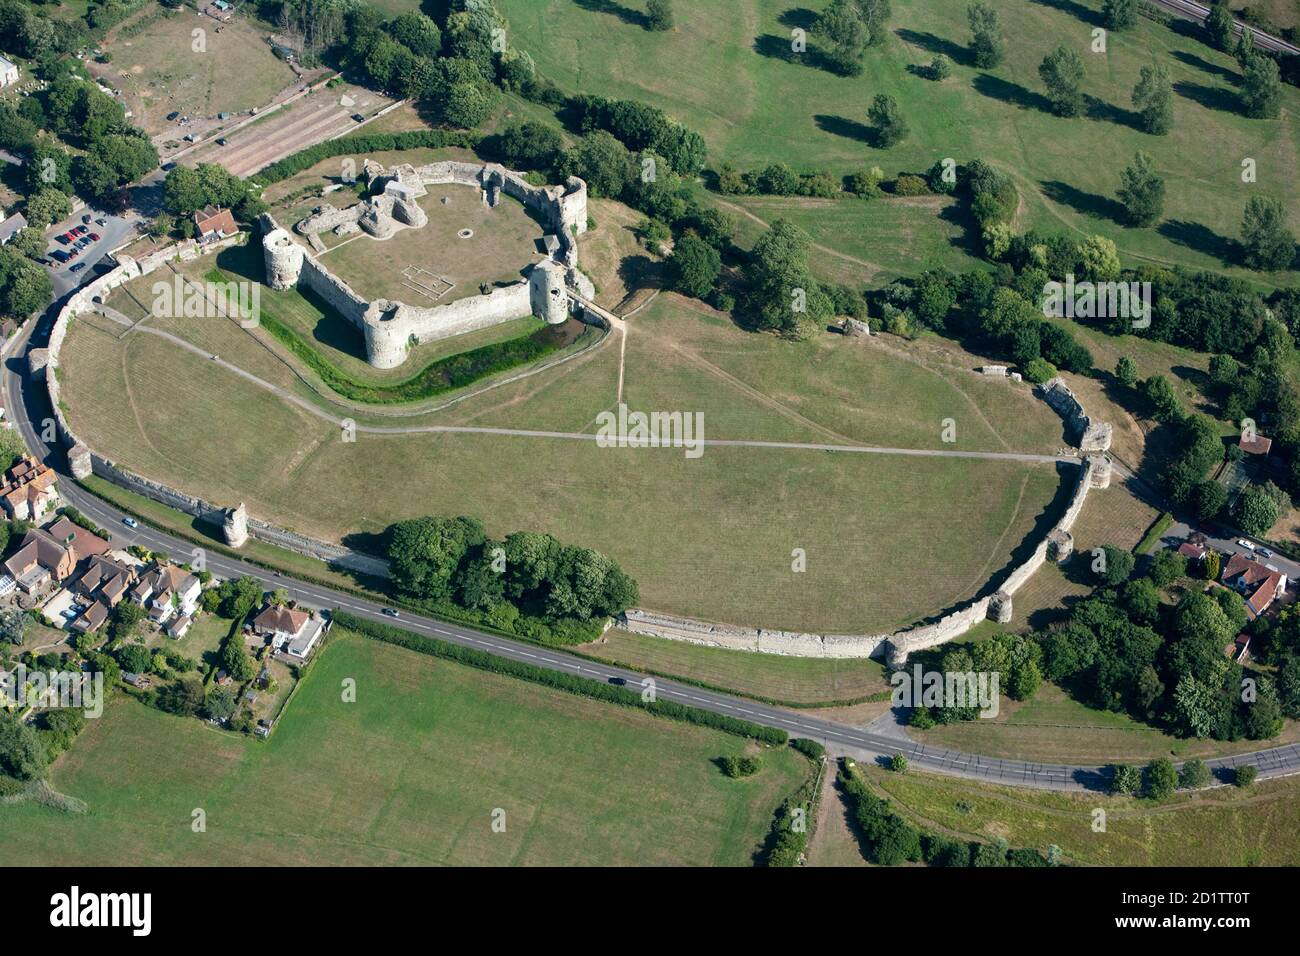 PEVENSEY CASTLE, East Sussex. Aerial view of the castle showing the medieval inner bailey and the larger Roman enclosure. Stock Photo